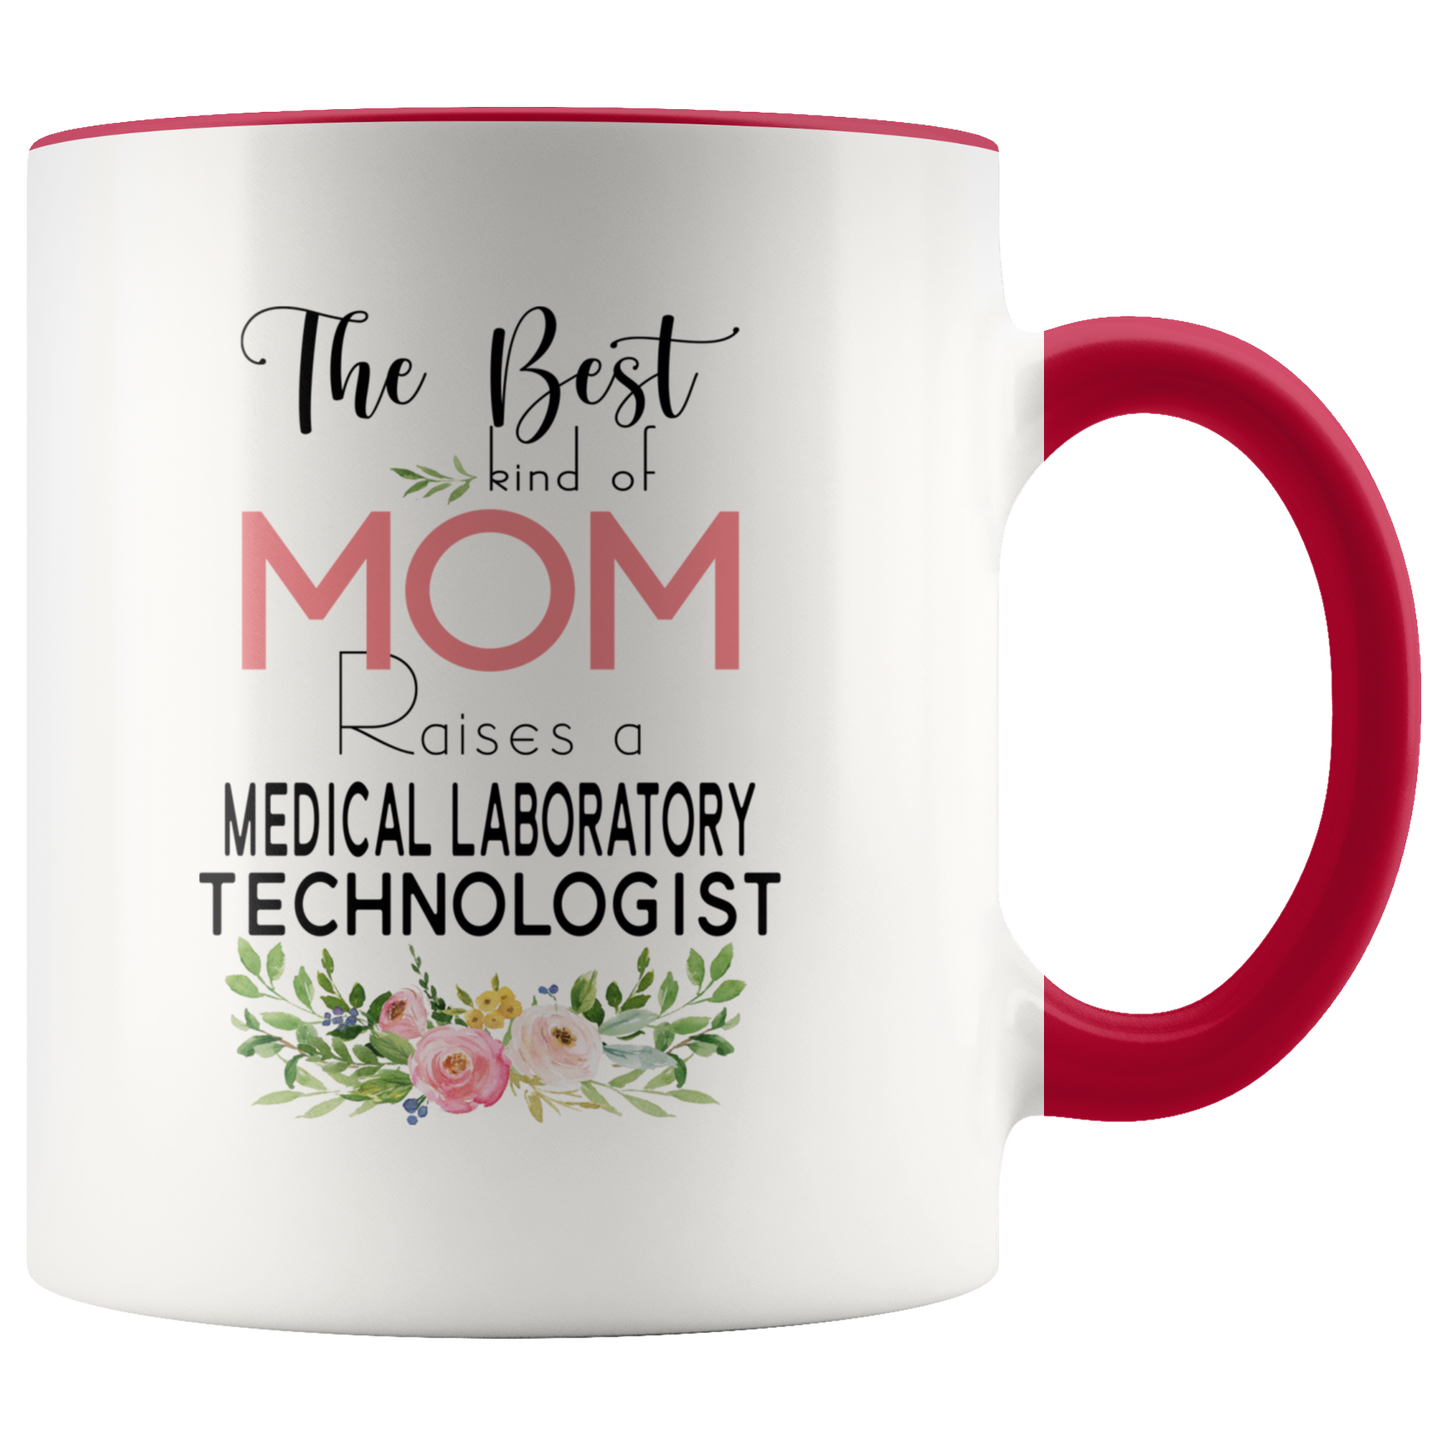 M-21383890-sp-23330 - Mothers Day Mugs Job Funny - The Best Kind Of Mom Raises A M